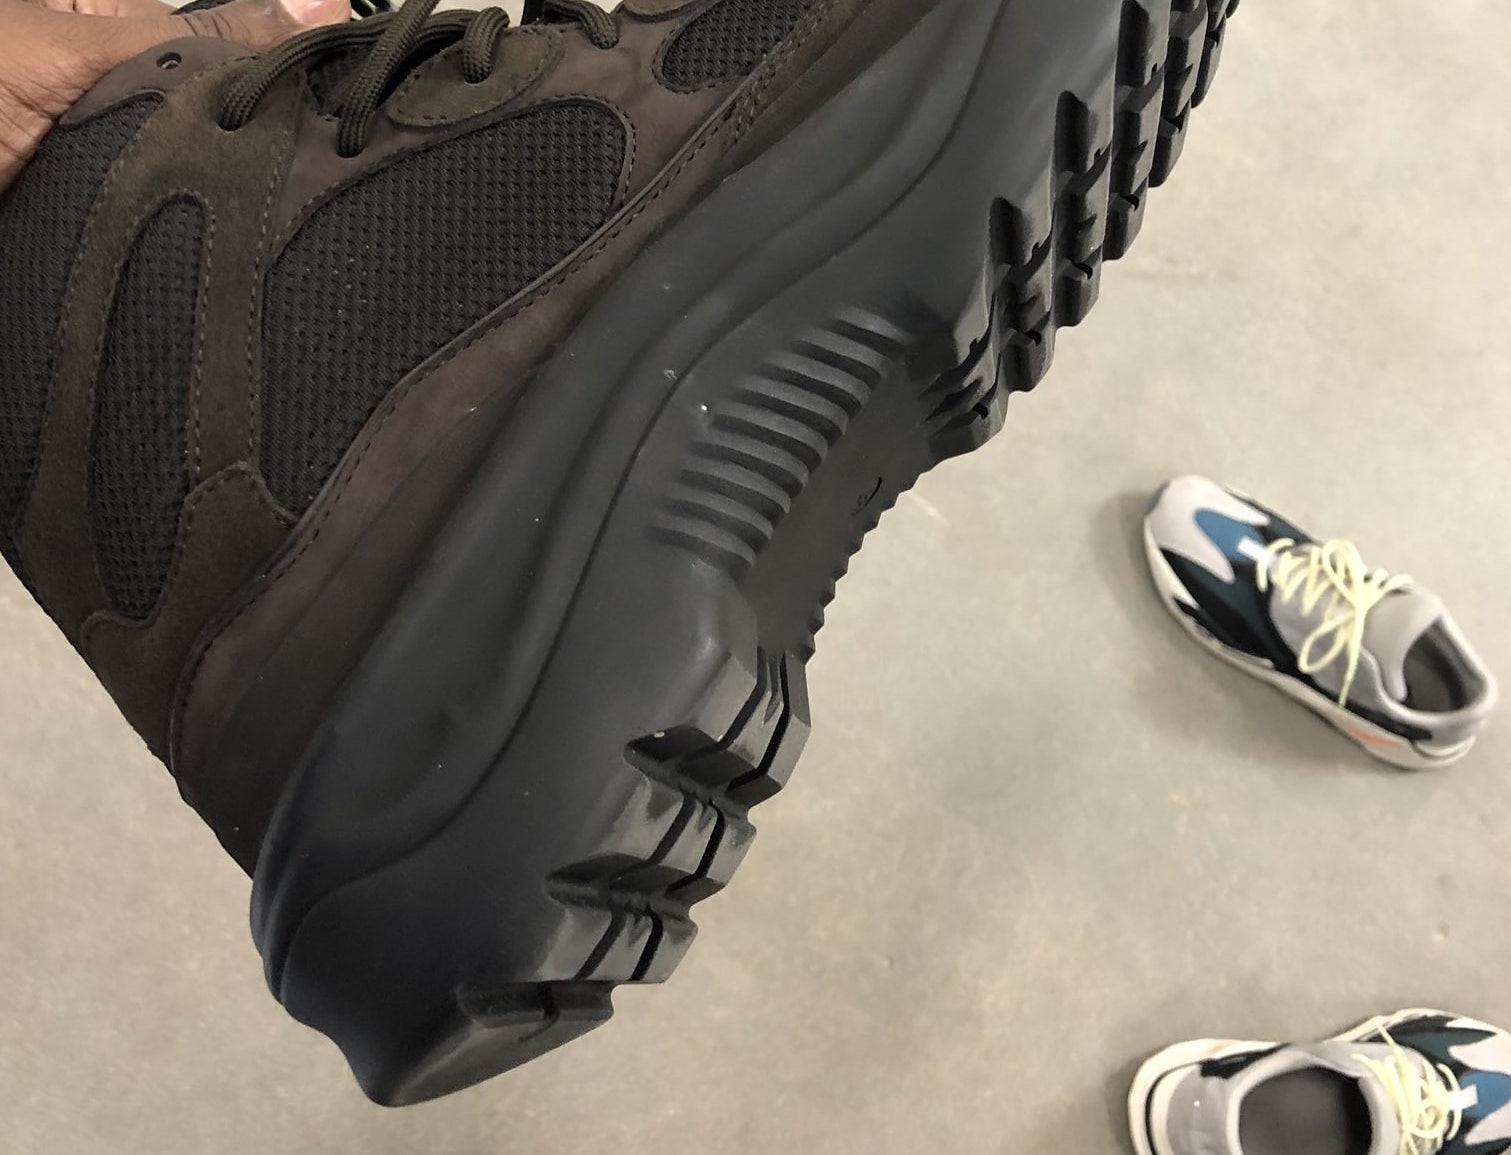 yeezy boots toddler